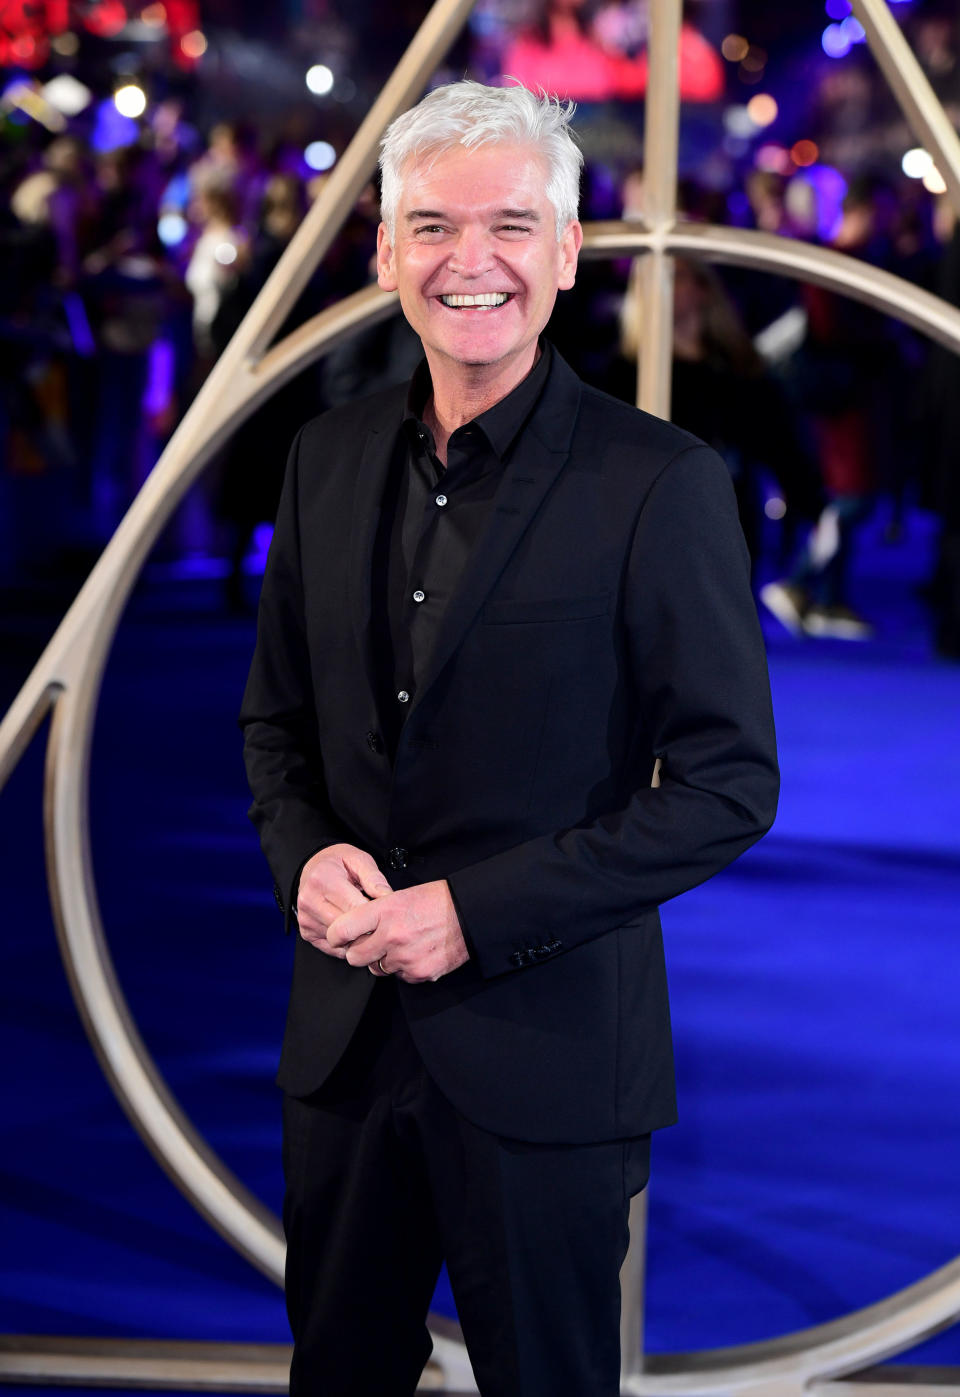 Phillip Schofield who has admitted he knew he was gay when he got married in 1993, but that he was "naive" to think he could suppress his sexuality.. Issue date: Sunday February 9, 2020. The co-host of ITV's This Morning came out on the show last Friday. 